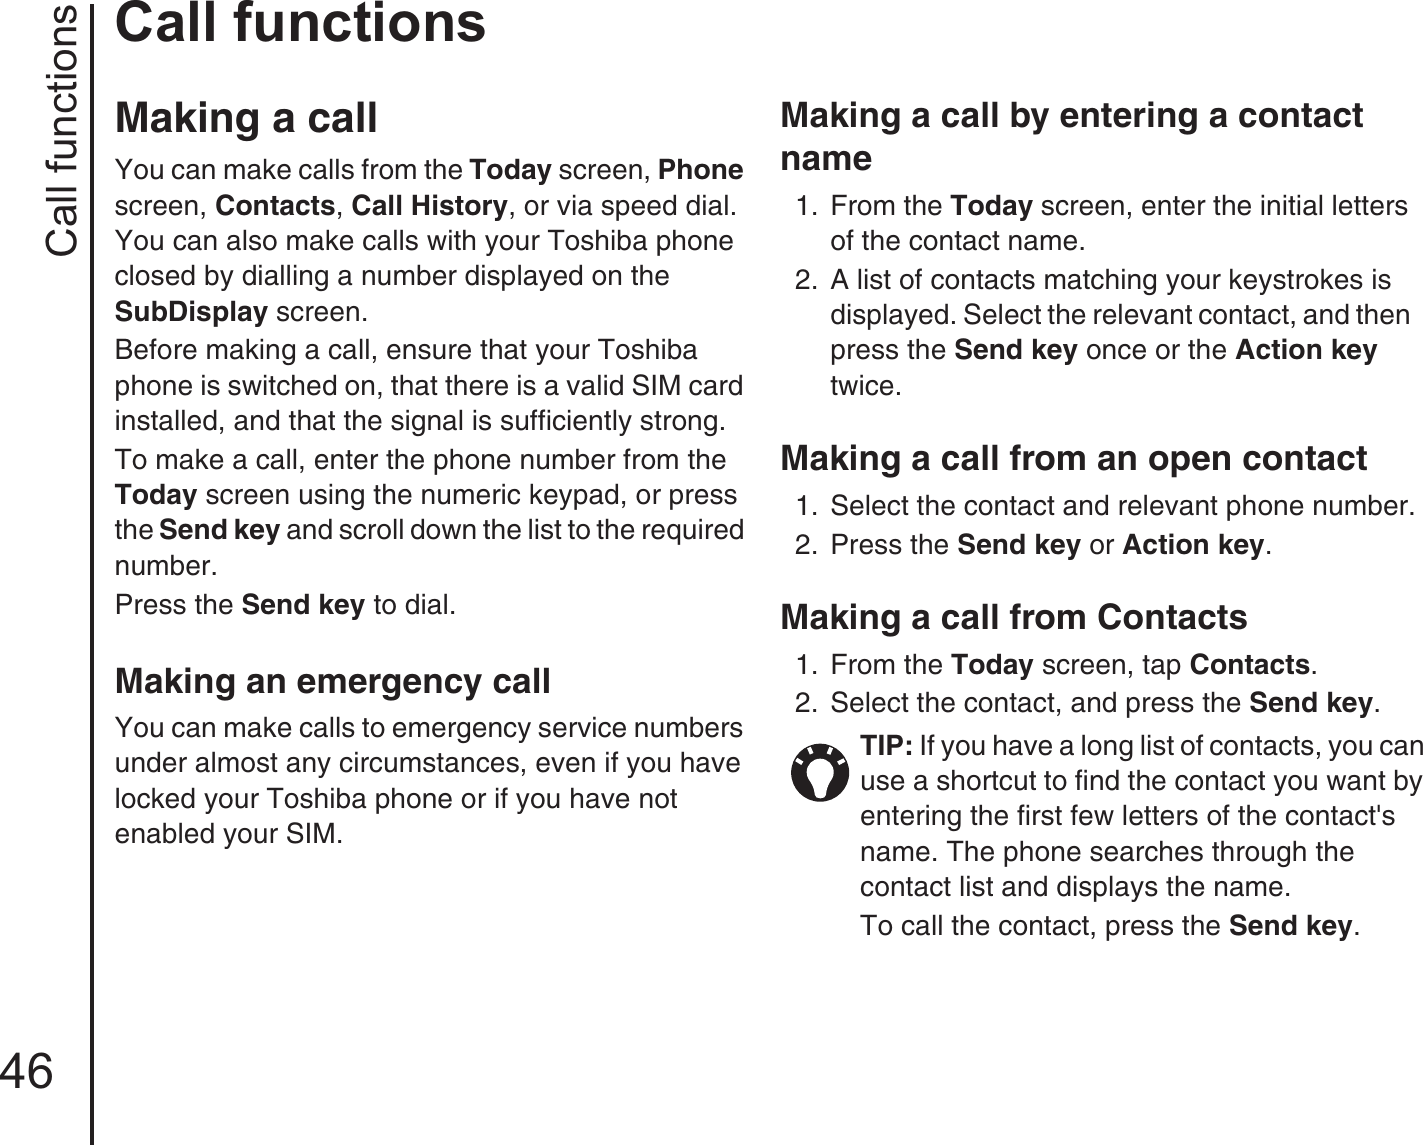 Call functions46Call functionsCall functionsMaking a call You can make calls from the Today screen, Phone screen, Contacts, Call History, or via speed dial. You can also make calls with your Toshiba phone closed by dialling a number displayed on the SubDisplay screen.Before making a call, ensure that your Toshiba phone is switched on, that there is a valid SIM card installed, and that the signal is sufficiently strong.To make a call, enter the phone number from the Today screen using the numeric keypad, or press the Send key and scroll down the list to the required number.Press the Send key to dial.Making an emergency call You can make calls to emergency service numbers under almost any circumstances, even if you have locked your Toshiba phone or if you have not enabled your SIM.Making a call by entering a contact name1.  From the Today screen, enter the initial letters of the contact name. 2.  A list of contacts matching your keystrokes is displayed. Select the relevant contact, and then press the Send key once or the Action key twice.Making a call from an open contact1.  Select the contact and relevant phone number.2.  Press the Send key or Action key.Making a call from Contacts1.  From the Today screen, tap Contacts. 2.  Select the contact, and press the Send key. TIP: If you have a long list of contacts, you can use a shortcut to find the contact you want by entering the first few letters of the contact&apos;s name. The phone searches through the contact list and displays the name.To call the contact, press the Send key. 